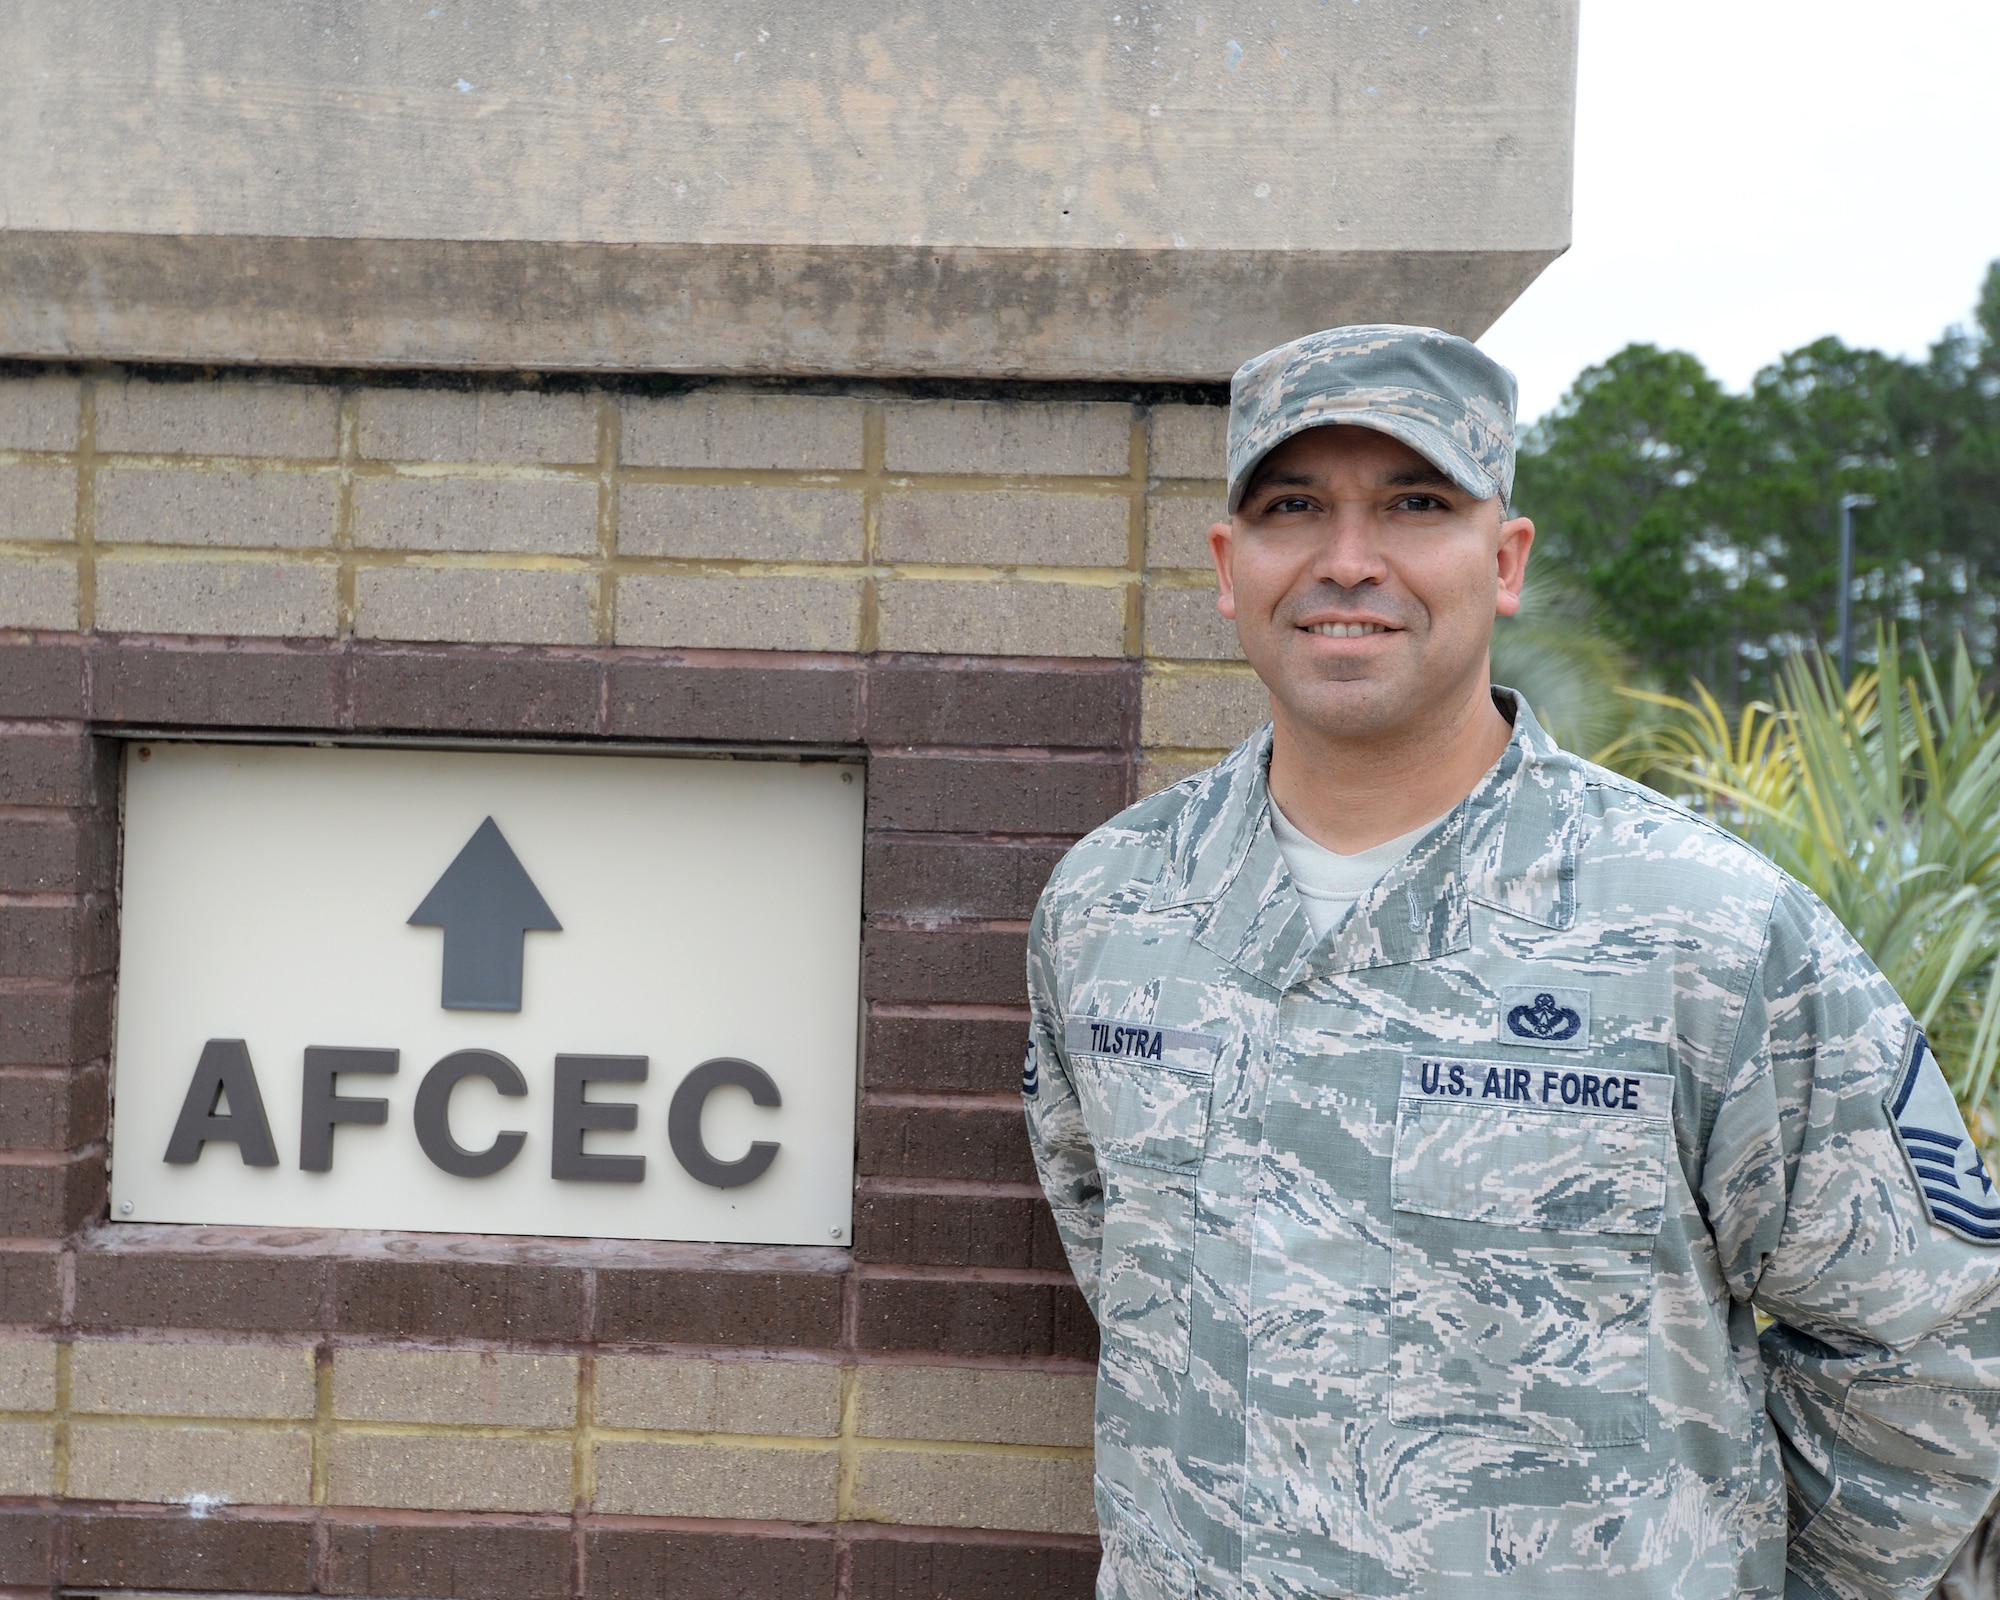 Master Sgt. Christopher Tilstra, AFCEC force development manager, poses next to the entrance of the Air Force Civil Engineer Center. AFCEC provides tools, practices and professional support to maximize Air Force civil engineer capabilities in base and contingency operations. The staff comprises technical and professional experts in a variety of areas including engineering, emergency management, training, pavement analysis, fire protection, explosive ordnance disposal, aircraft arresting systems, computer automation and energy management. (U.S. Air Force photo by Airman 1st Class Cody R. Miller/Released)